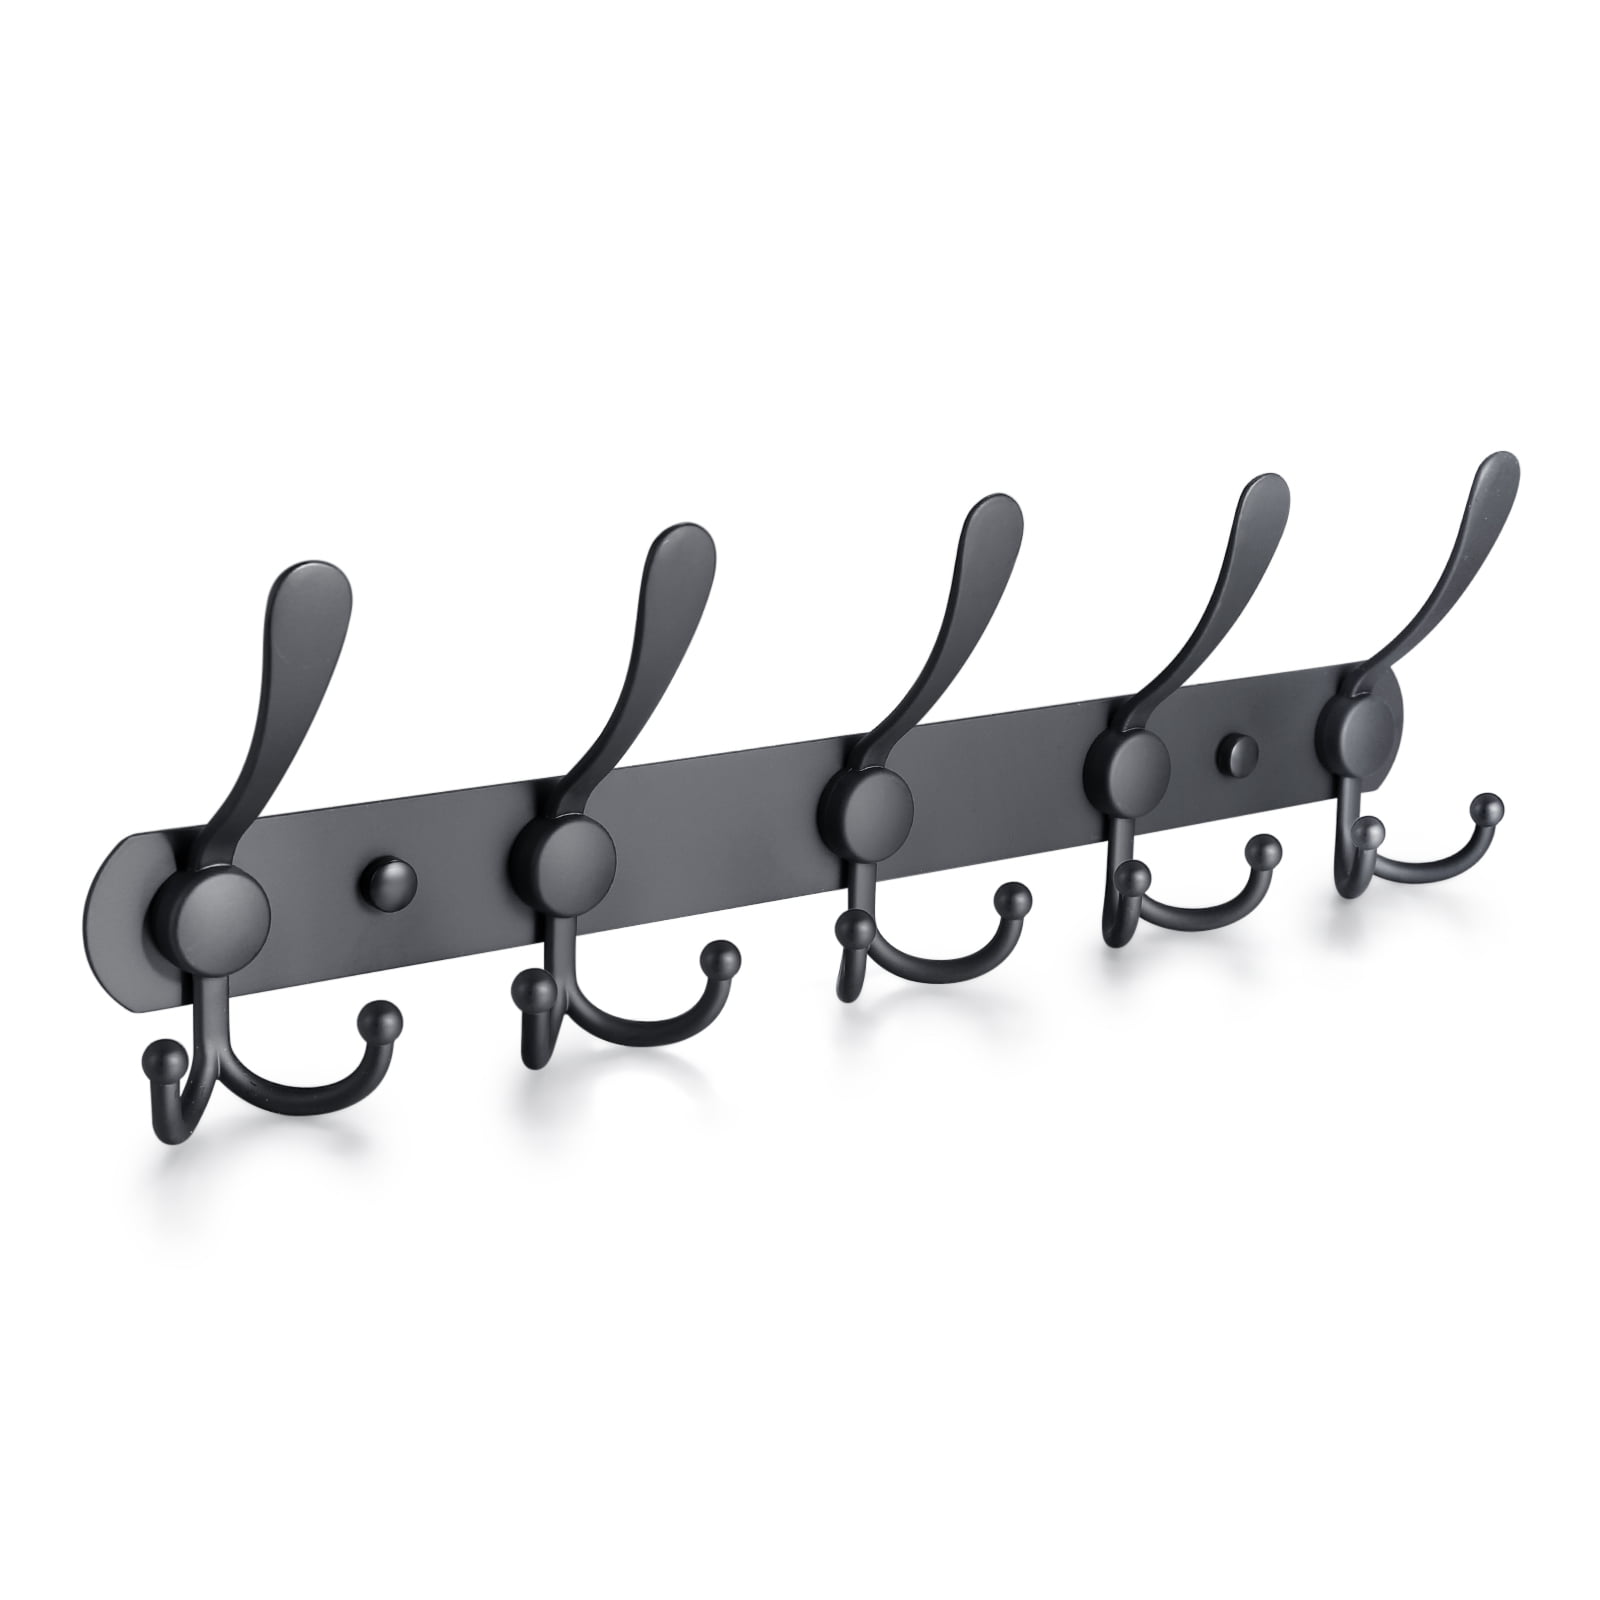 Buy Command Hooks,Wall Hooks,Hooks,Hooks for Hanging,Picture Hangers,Shower  Hooks,Hat Rack for Wall,Towel Hooks,Kitchen Towel Holder.Fall Decor for  Home,Bath & bBody Works, Towel Rack?Purse Hanger Online at Lowest Price  Ever in India | Check